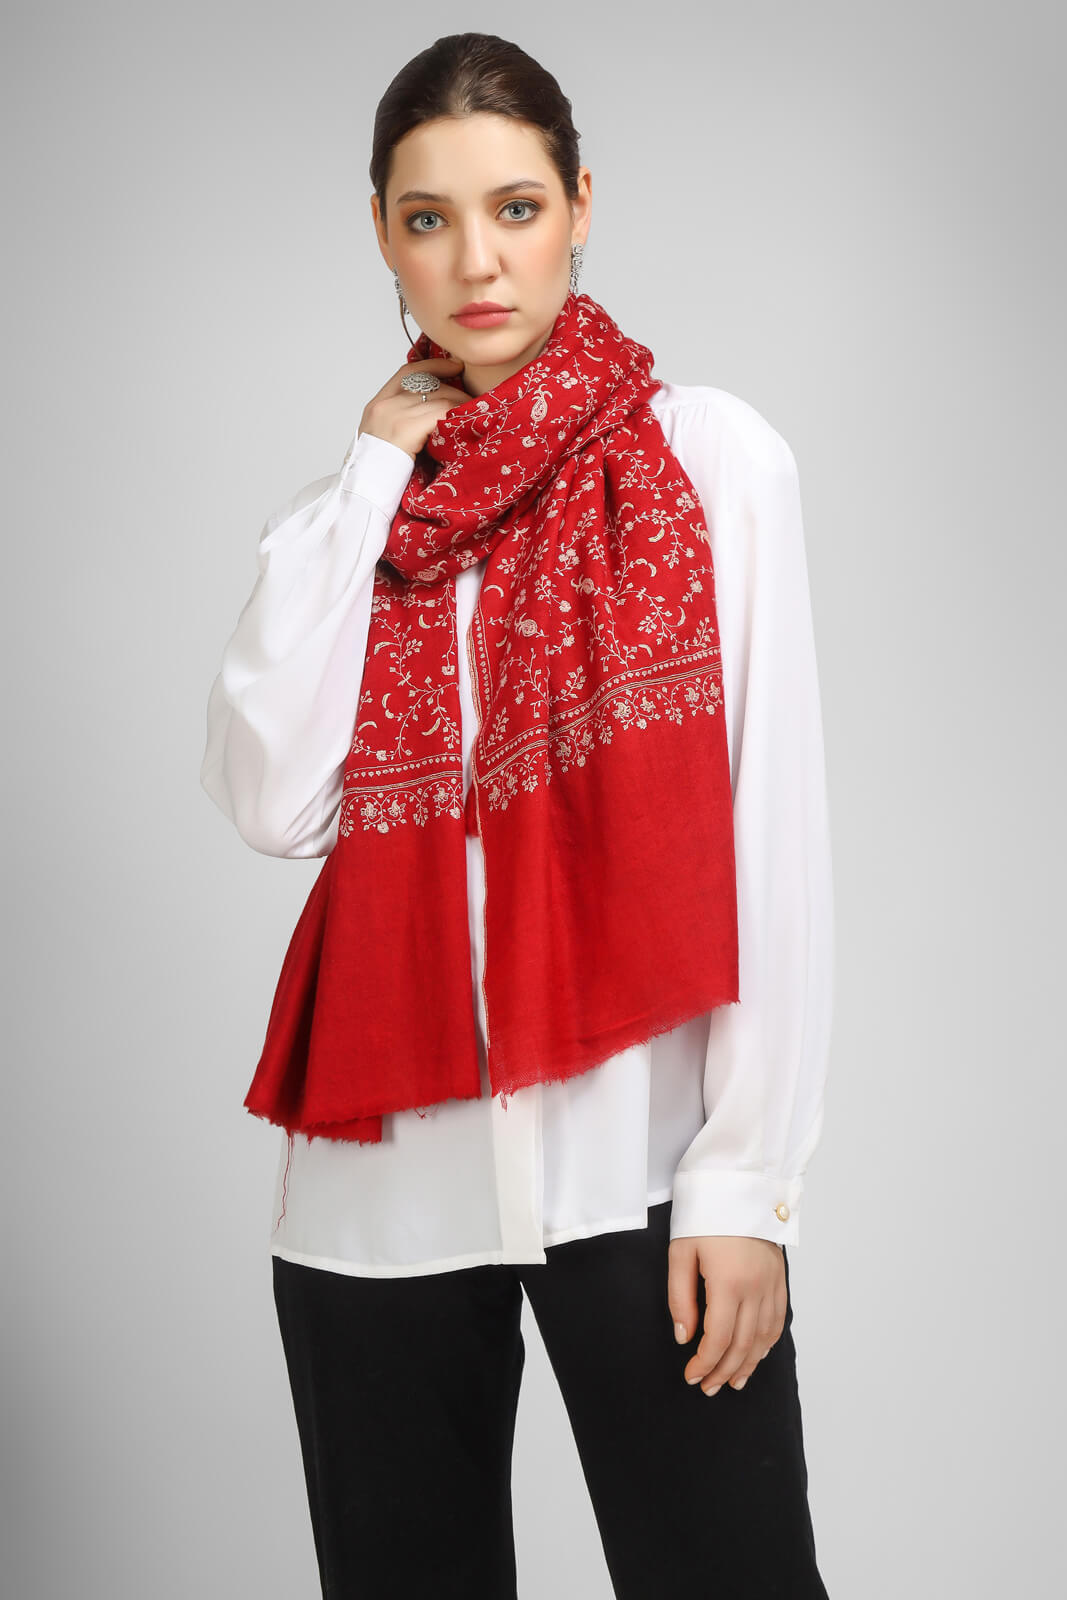 PASHMINA EMBROIDERY STOLE - Red Pashmina Jaldaar stole - "We deliver exquisite products to your doorstep in the United States, China, Japan, Germany, United Kingdom, France, Canada, and Paris. Experience seamless international delivery with us."